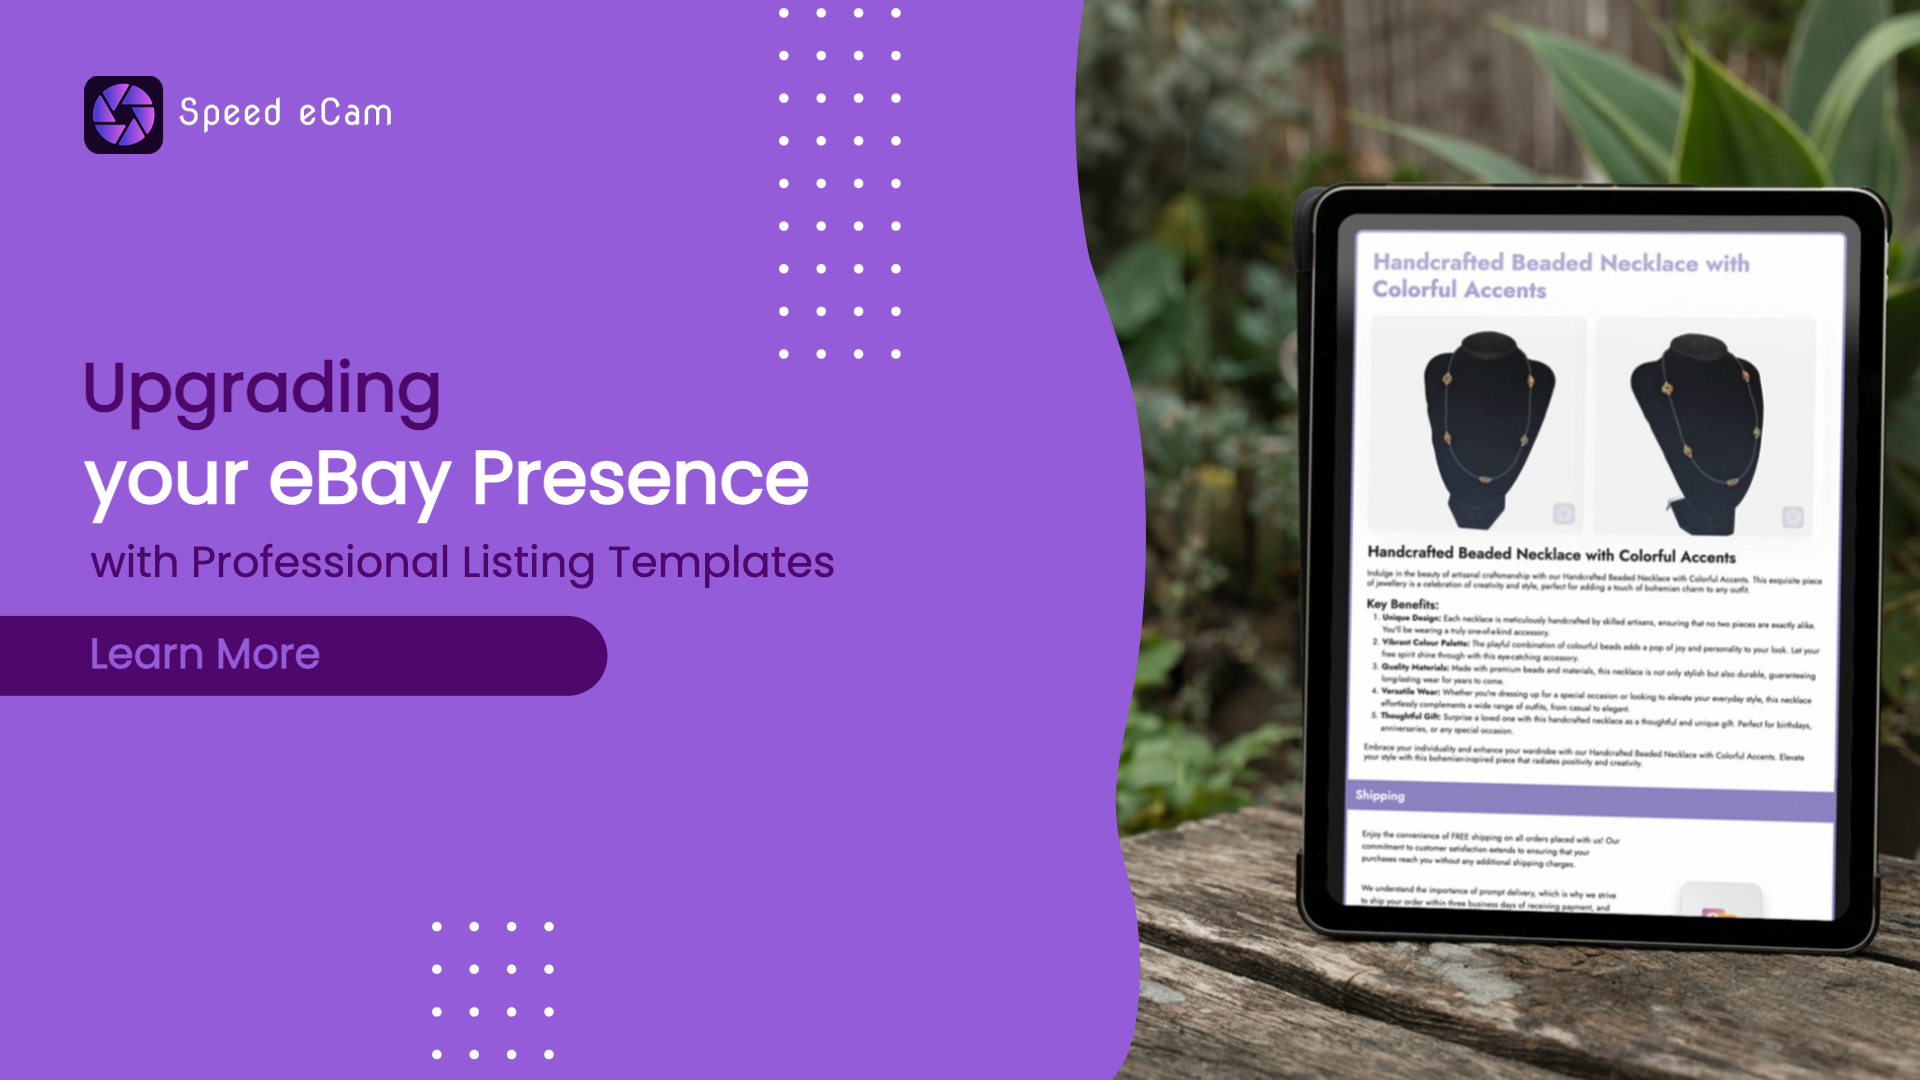 Upgrading your eBay Presence with Professional Listing Templates